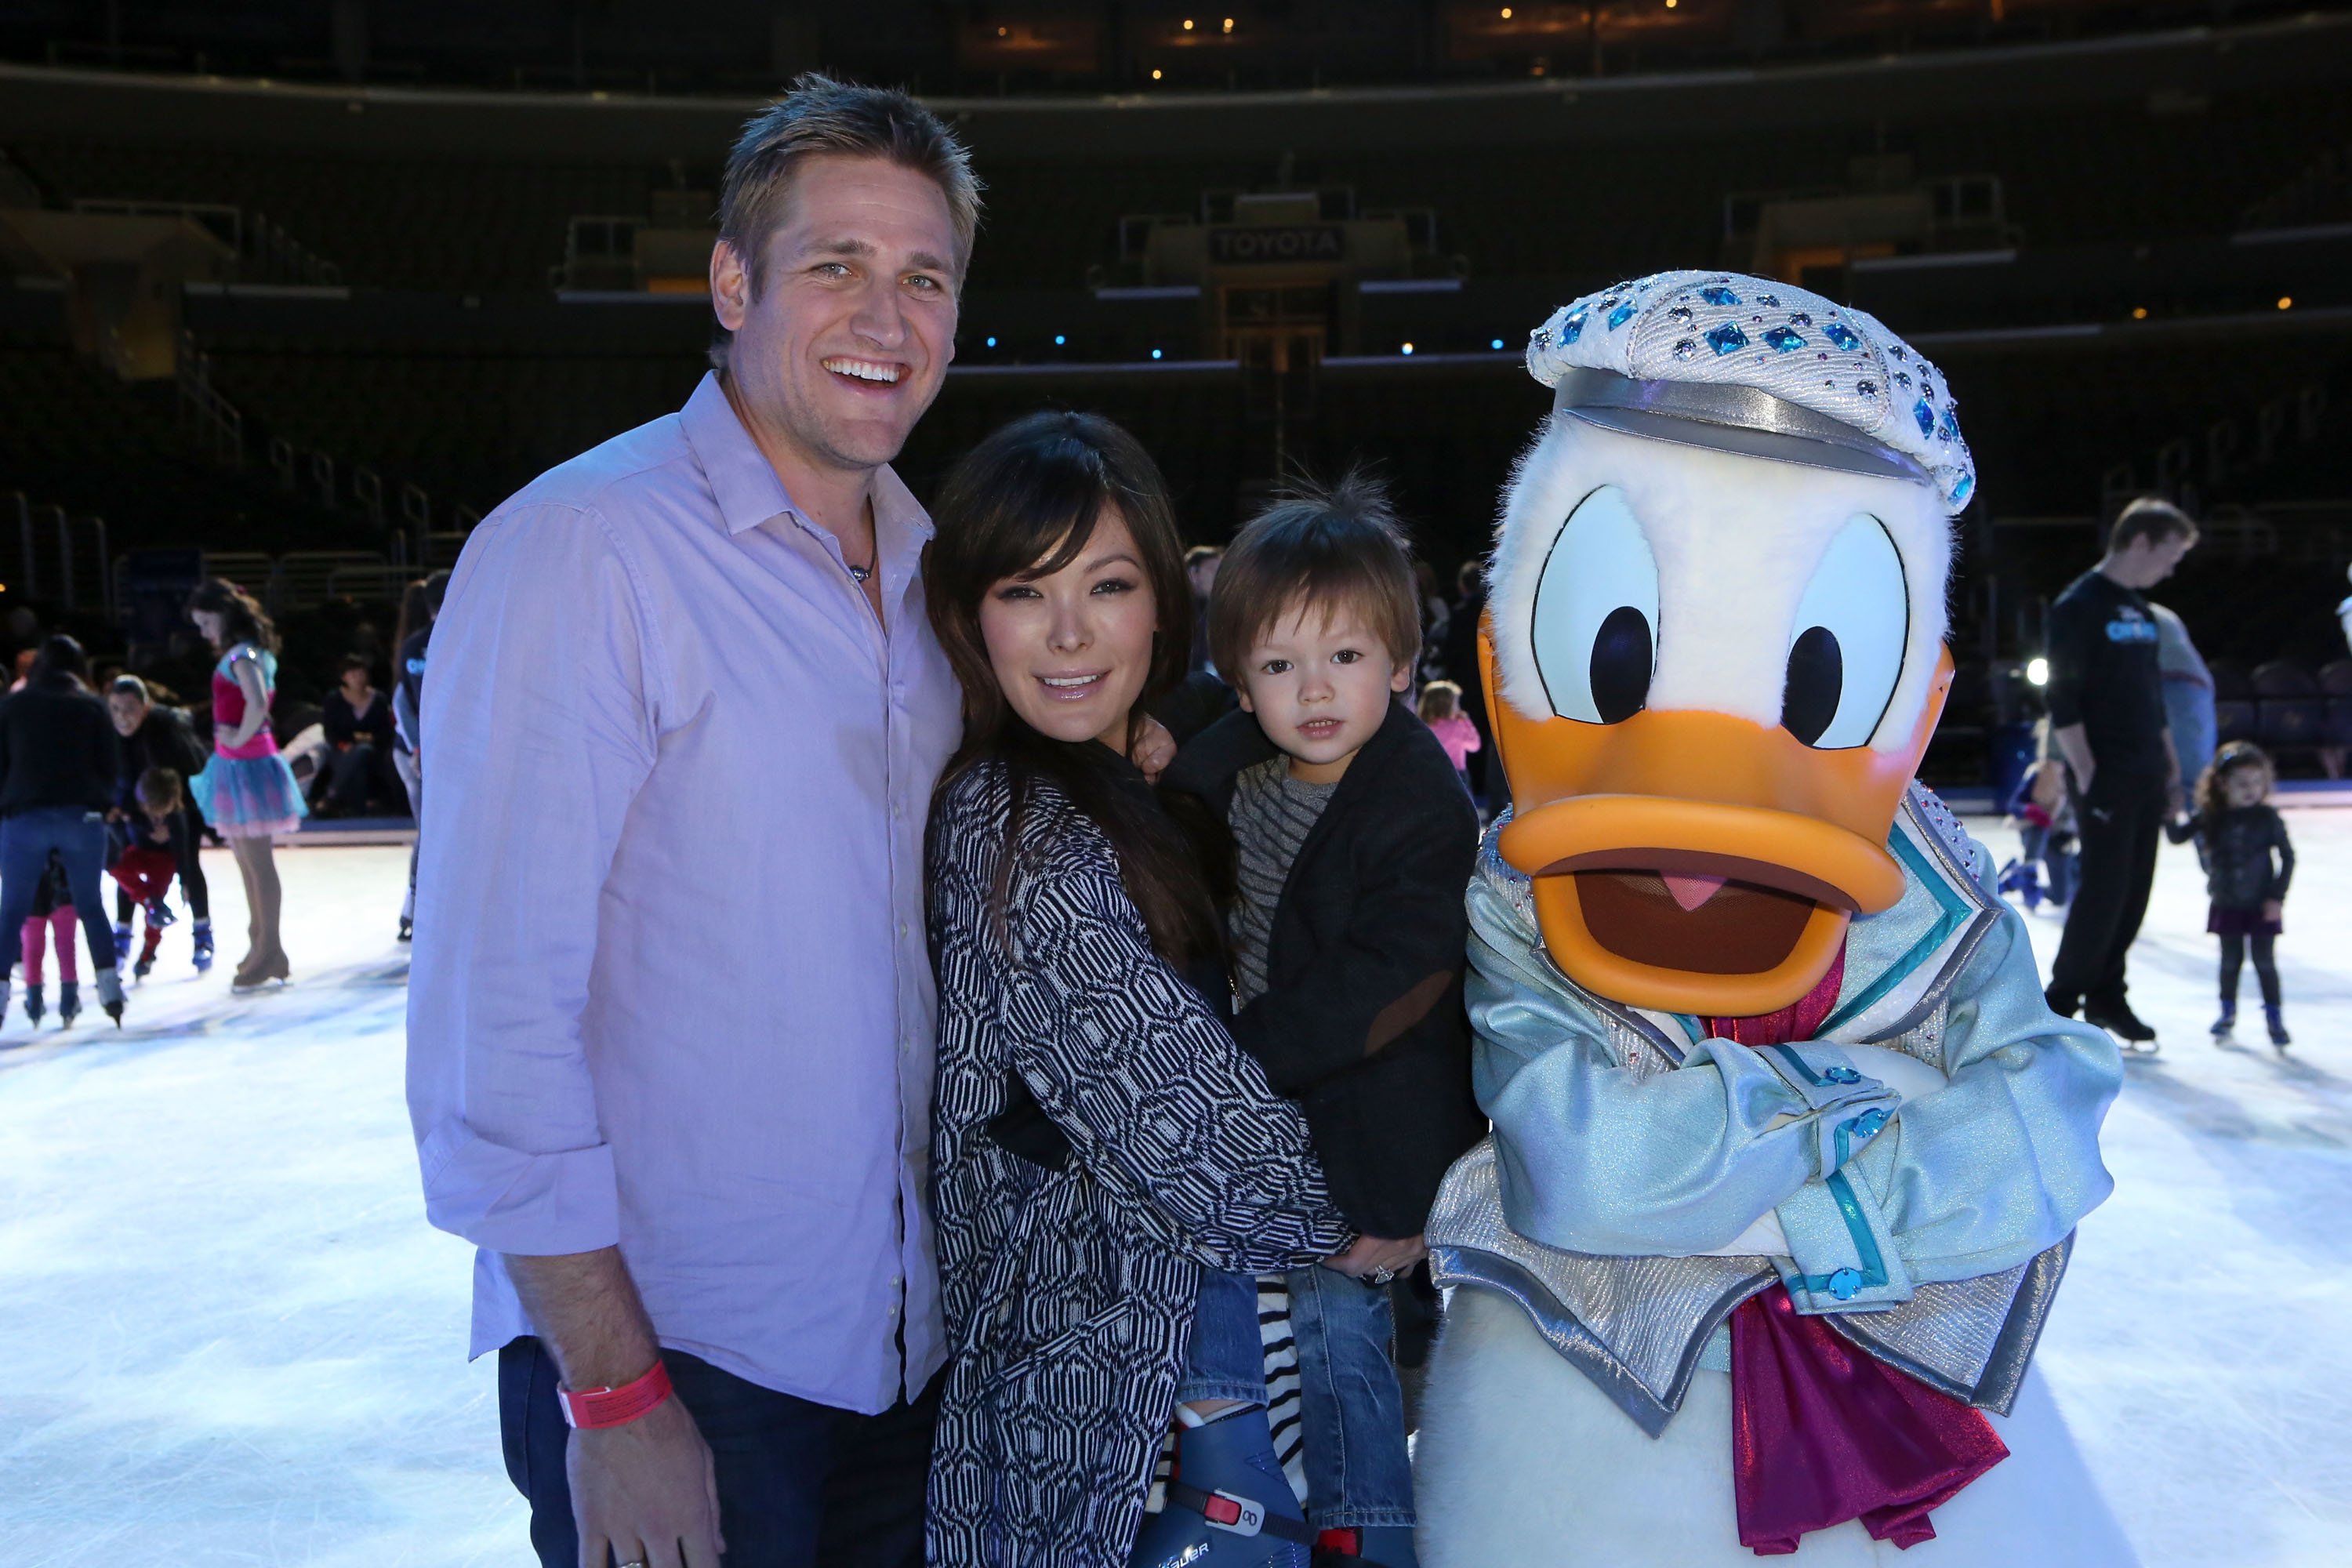  Curtis Stone, Lindsay Price and their oldest son at "Rockin' Ever After" at Staples Center in 2013 | Source: Getty Images